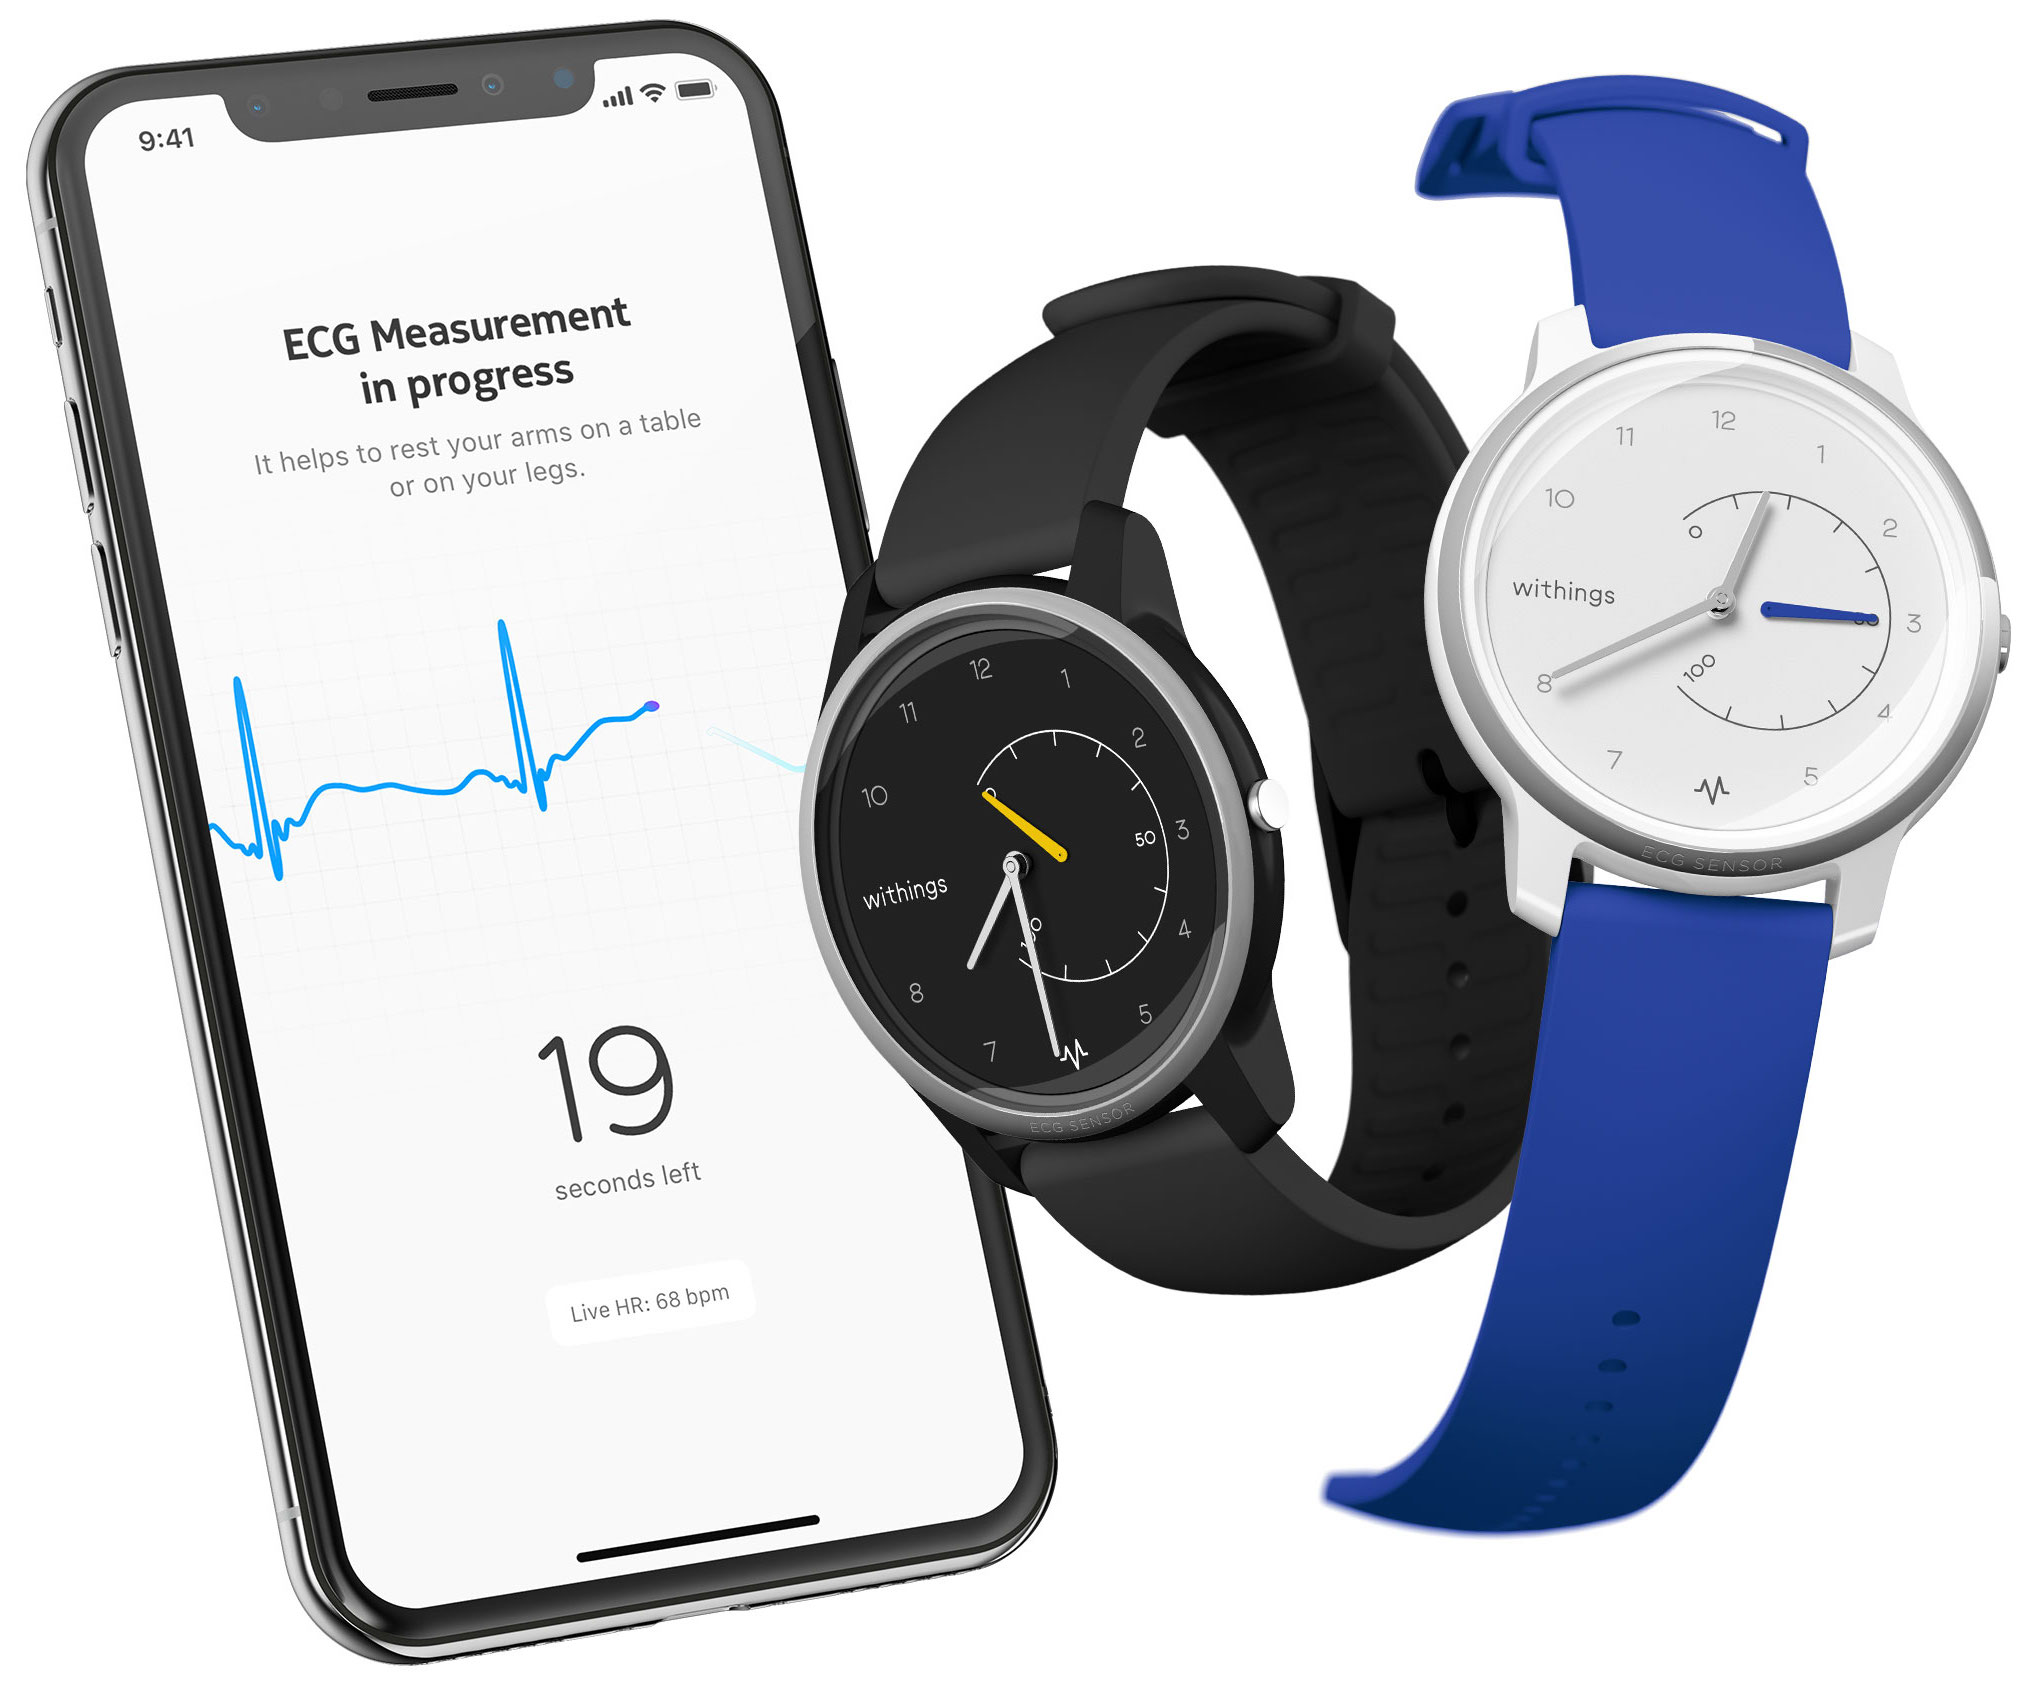 https://www.digitaltrends.com/wp-content/uploads/2019/01/withings-move-ecg.jpg?fit=500%2C416&p=1